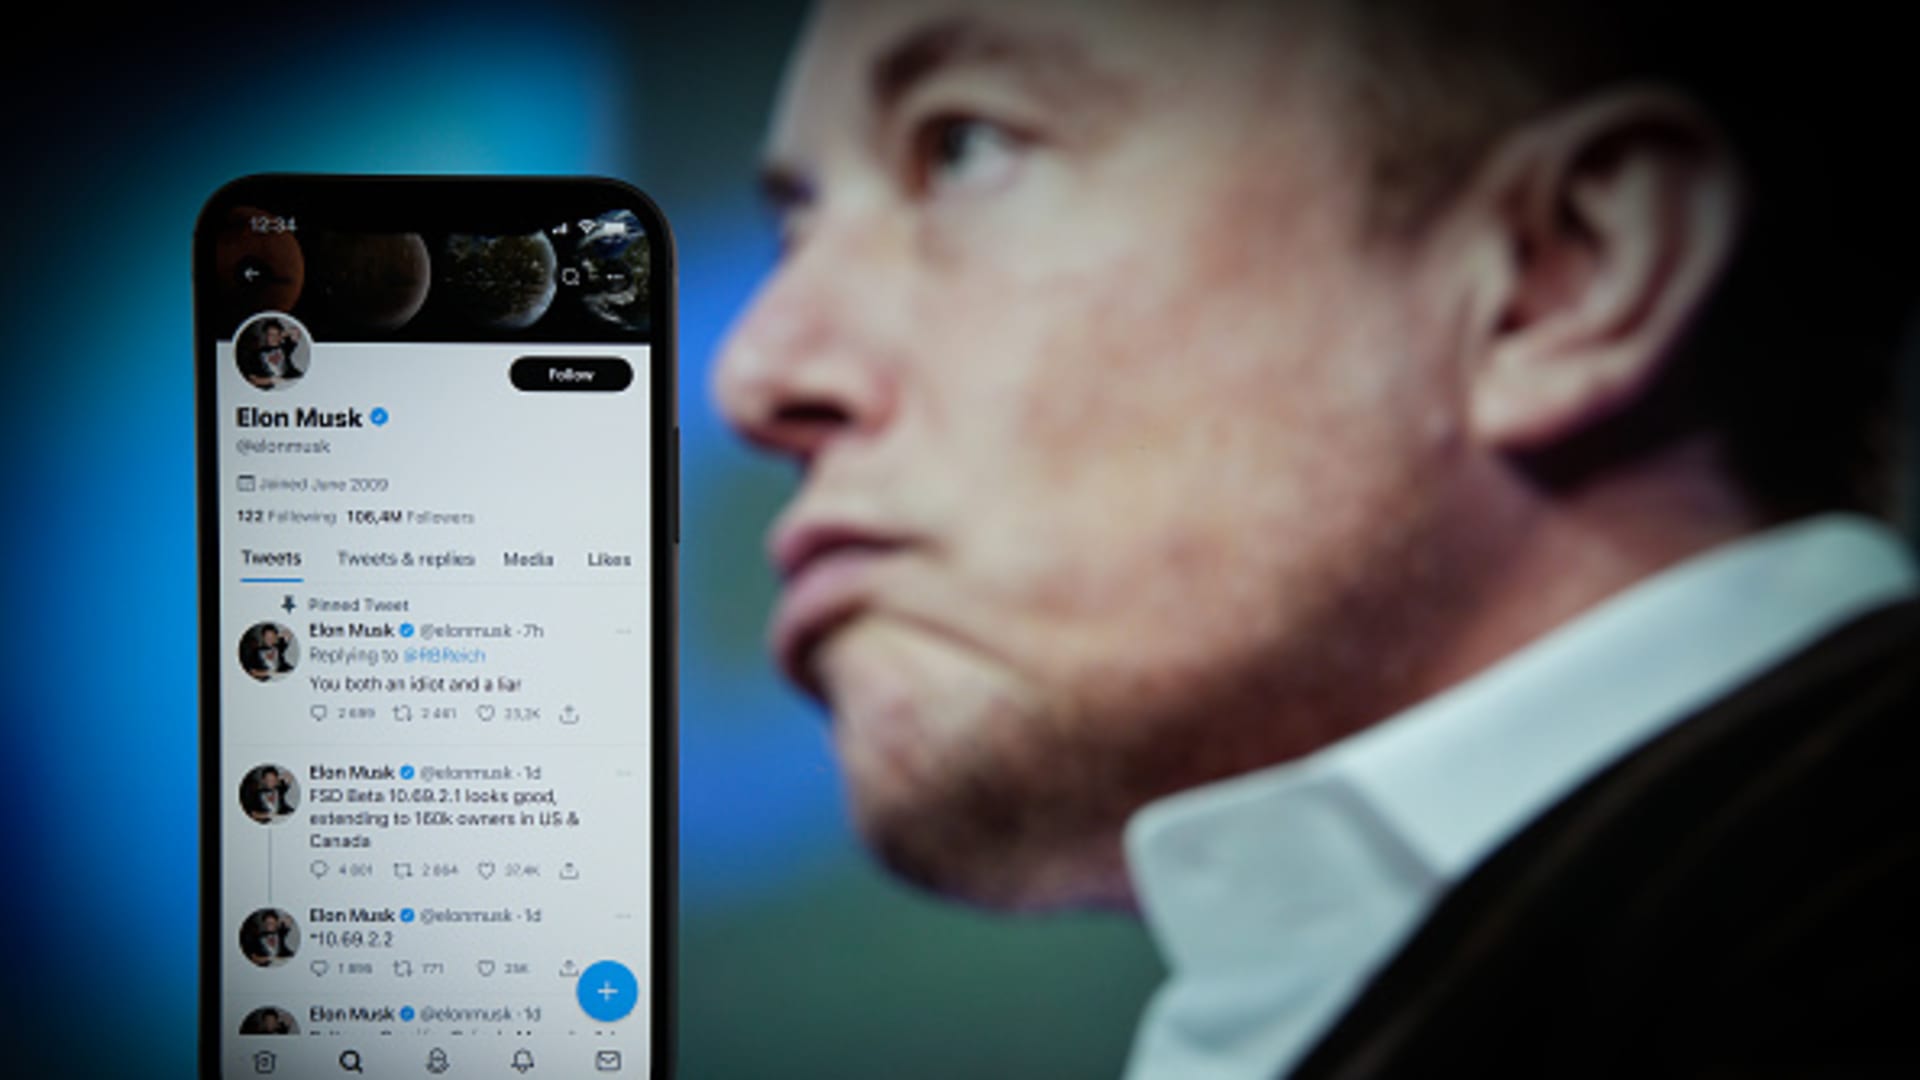 Who texted Elon Musk to get involved or offer advice on Twitter deal?